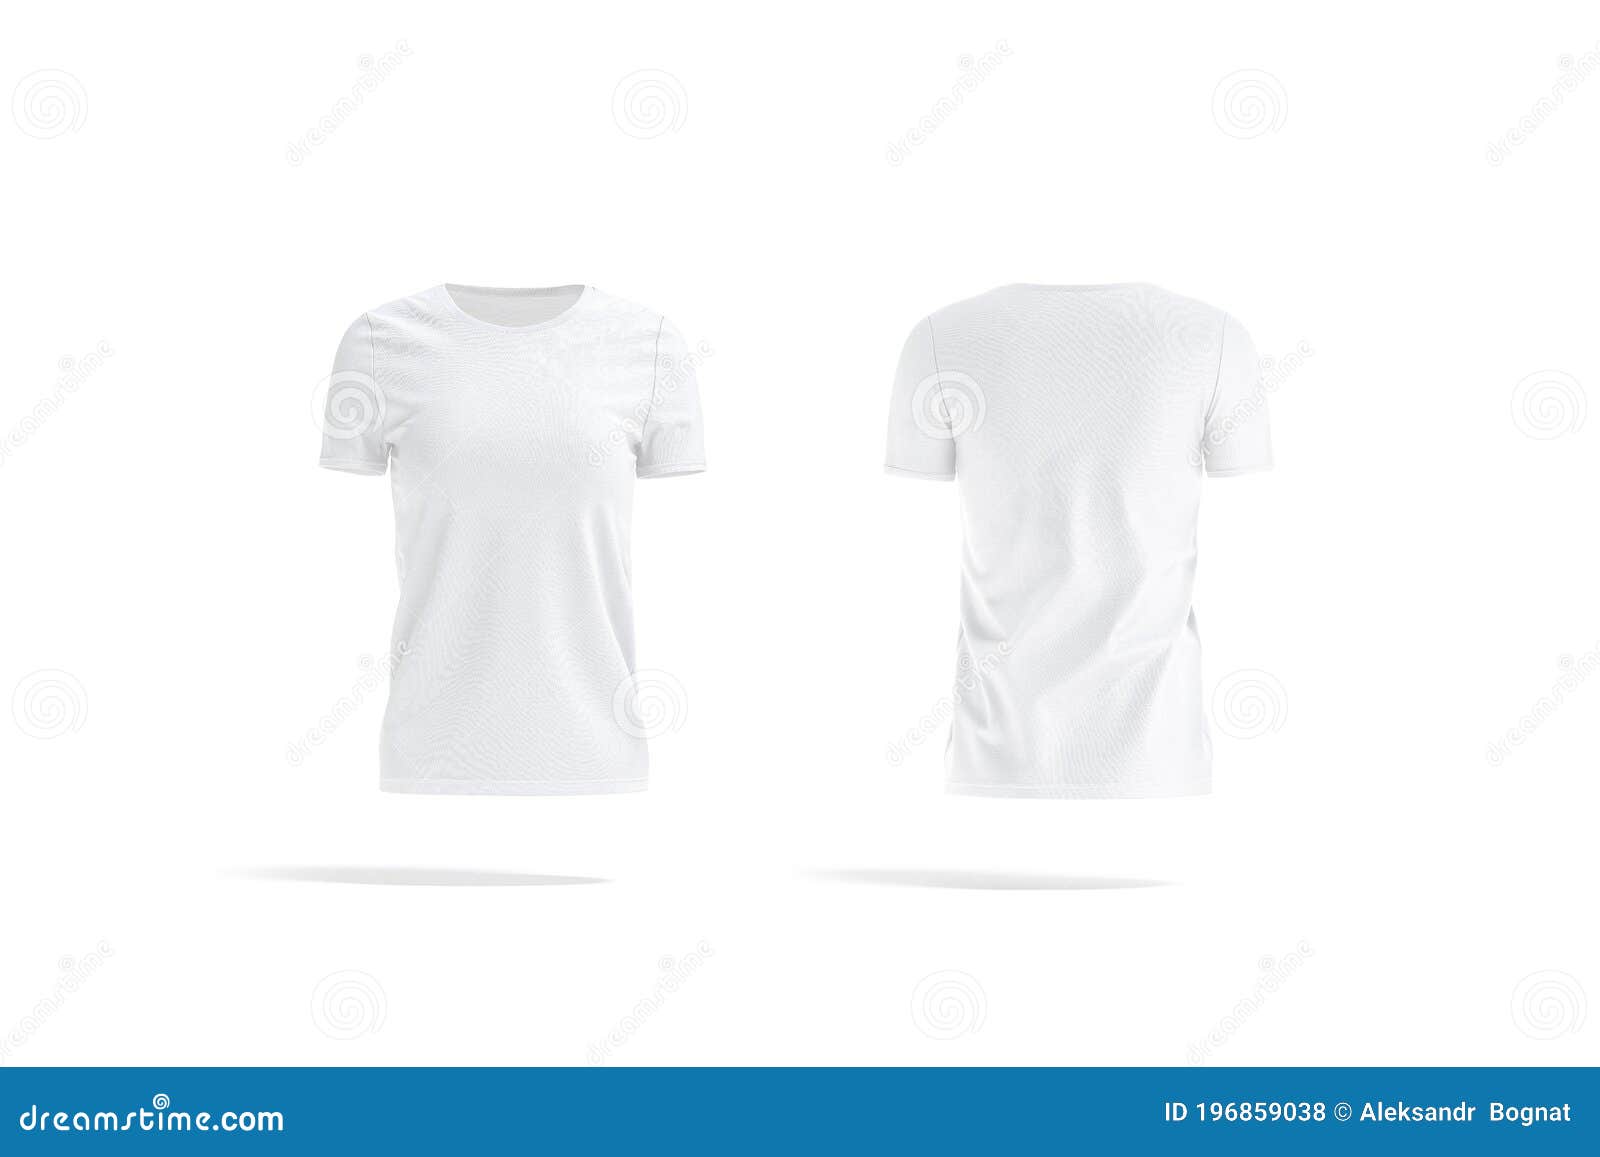 Download Blank White Women T-shirt Mockup, Front And Back View ...